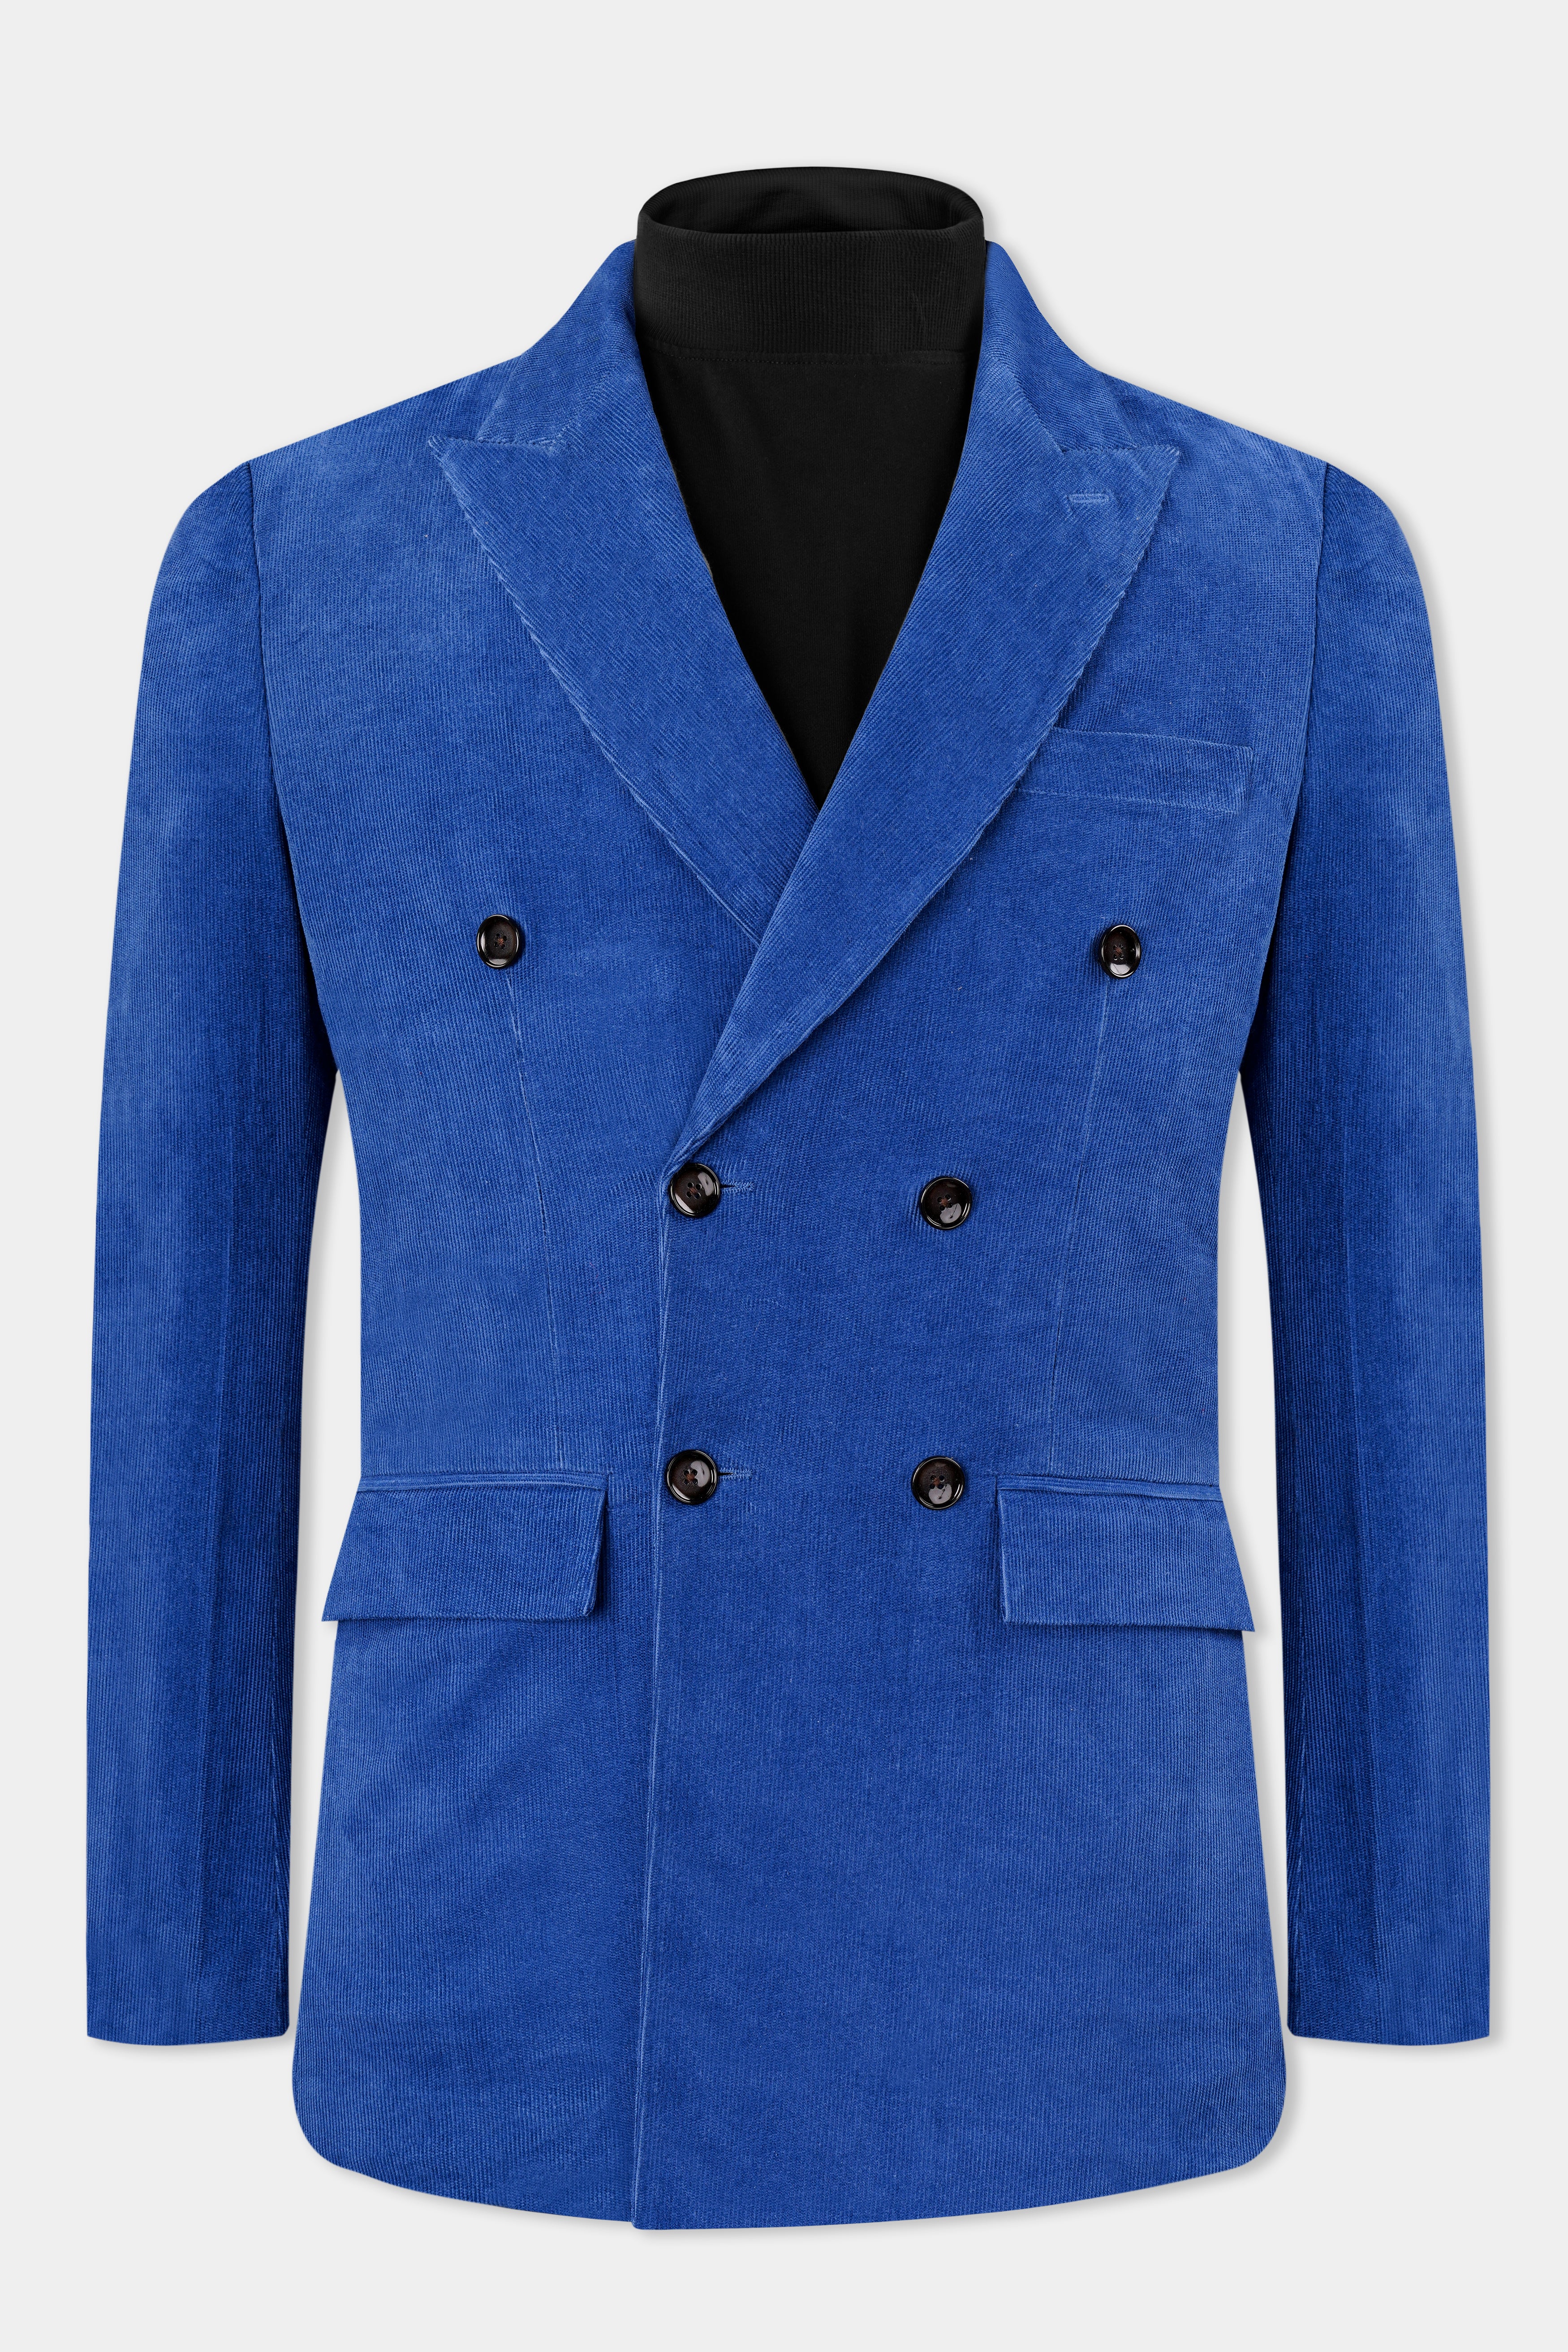 Shop Blue Blazers Collections For Men in India - French Crown